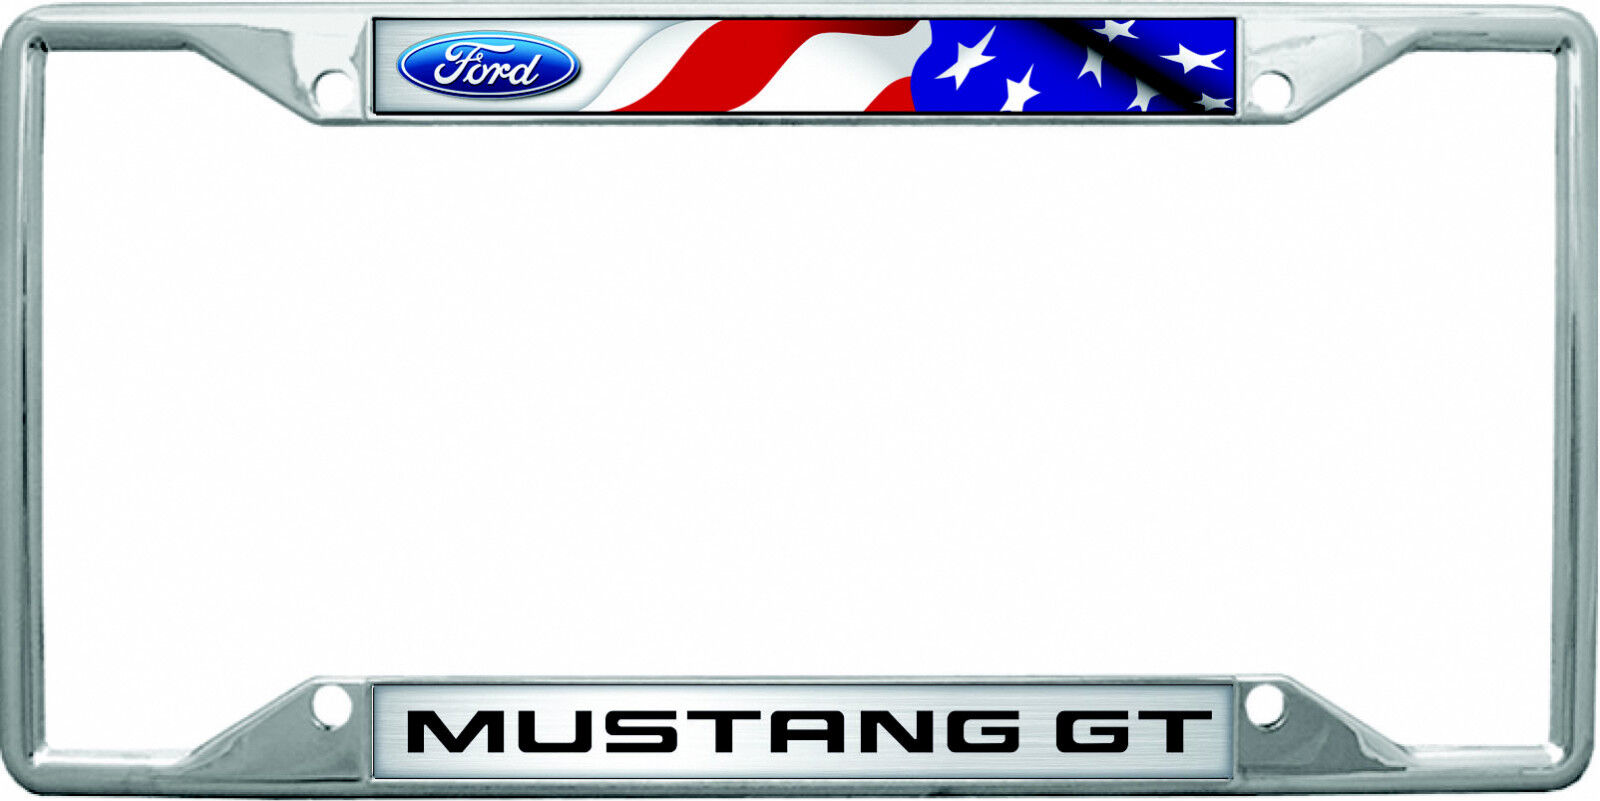 New Ford Mustang GT with Flag License Plate Frame